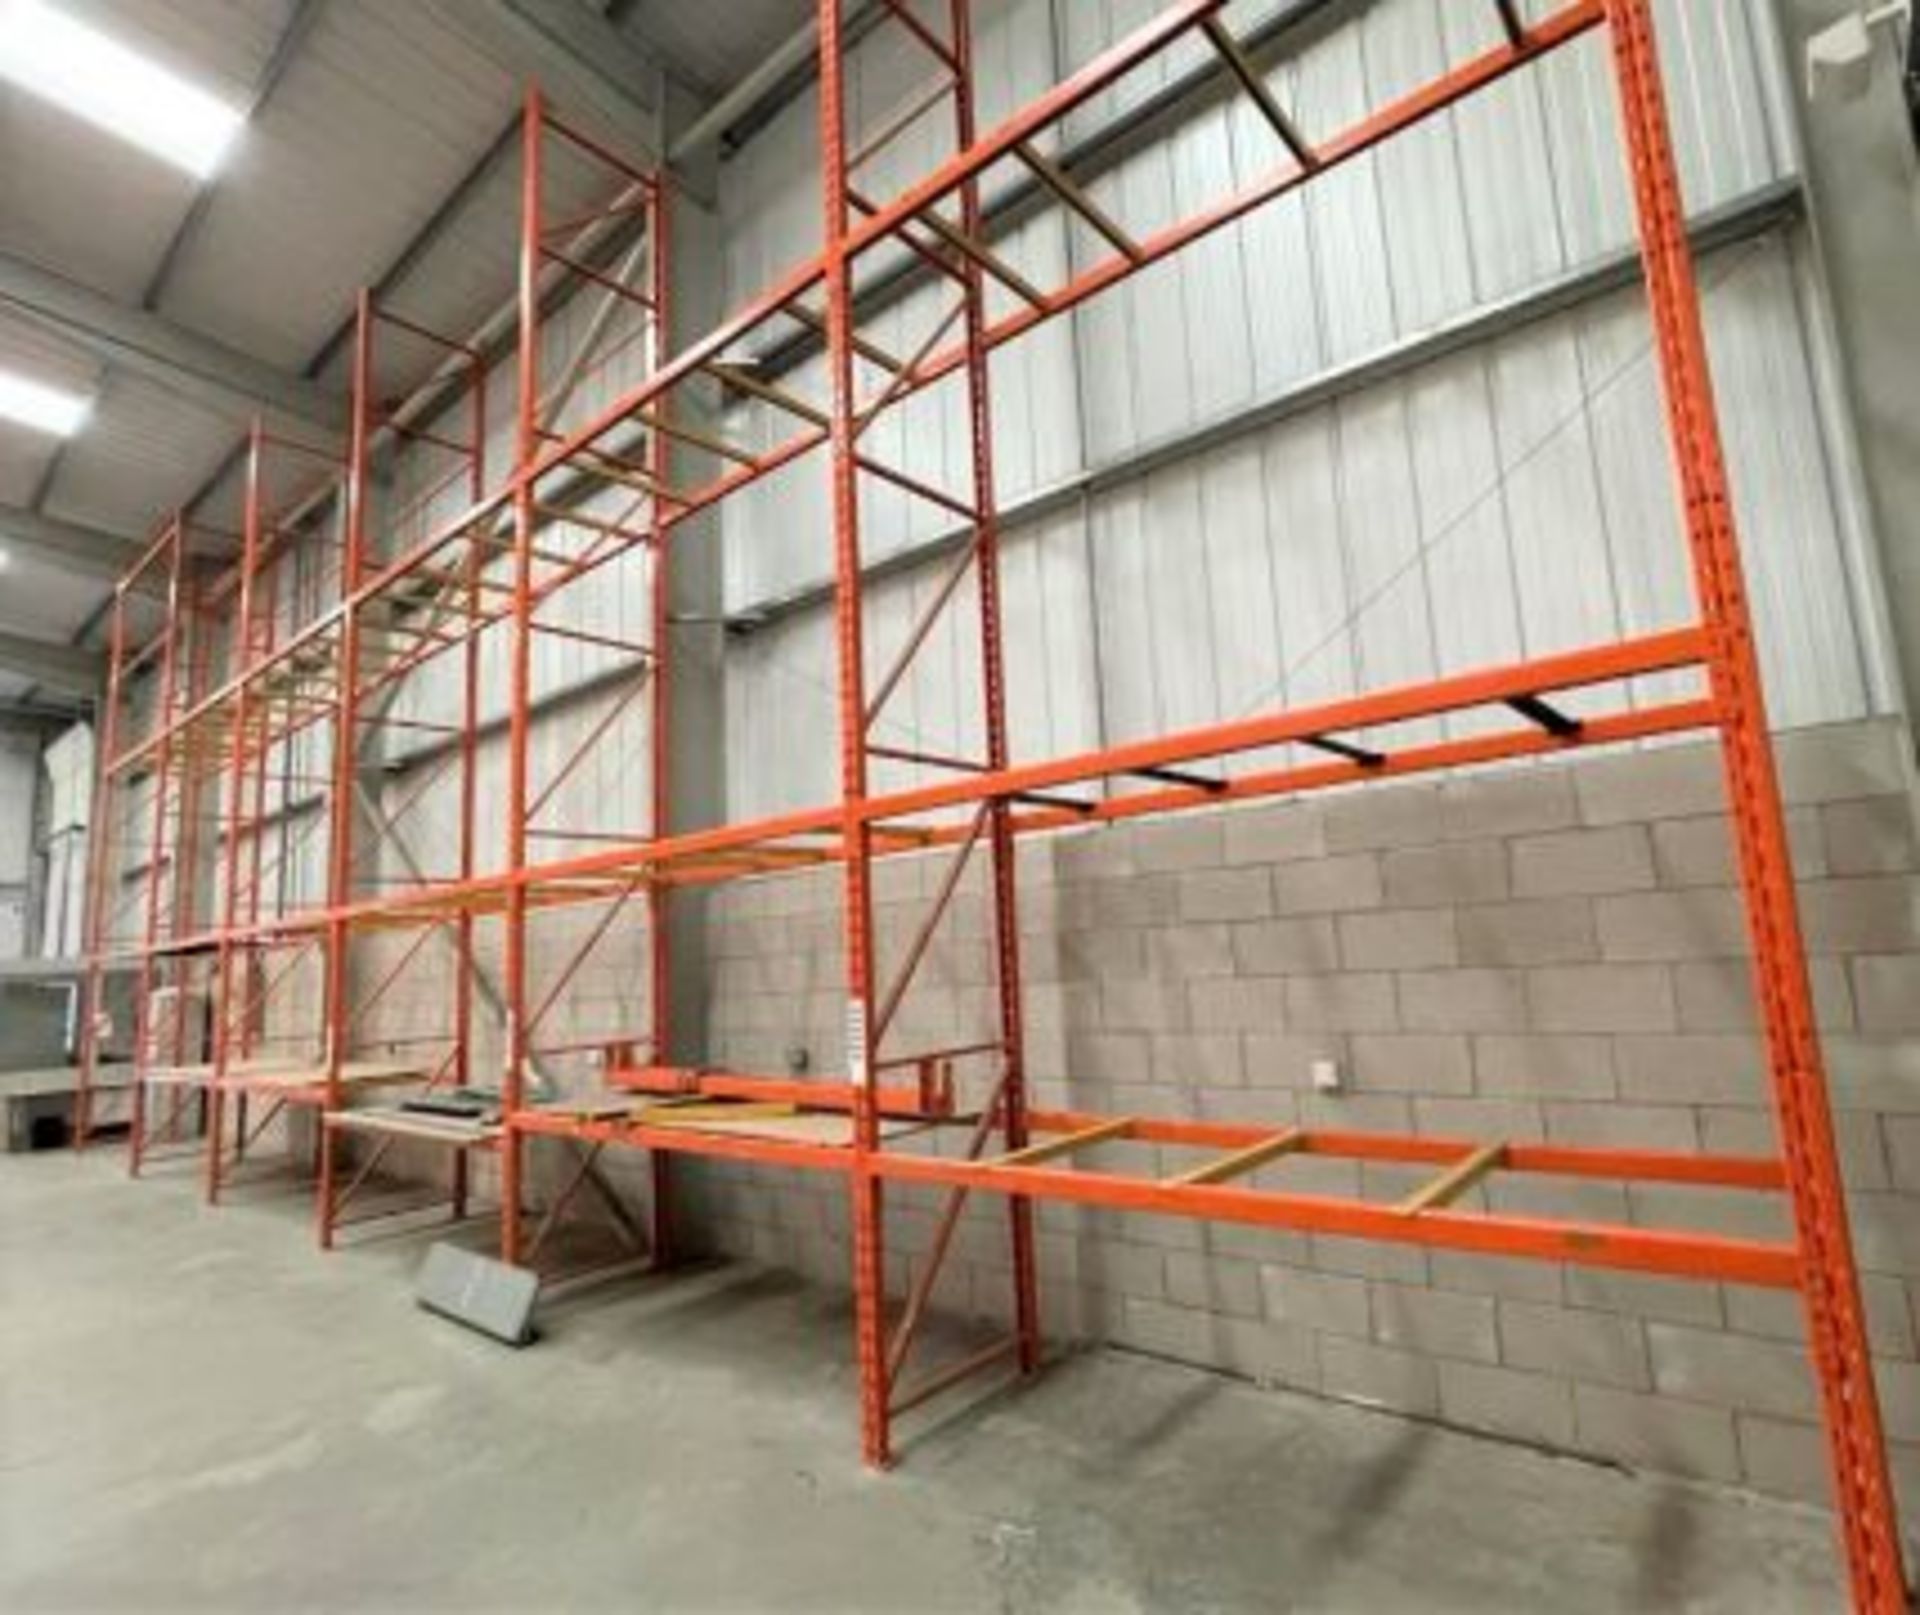 3 x Bays of RediRack Warehouse PALLET RACKING - Lot Includes 4 x Uprights and 18 x Crossbeams -